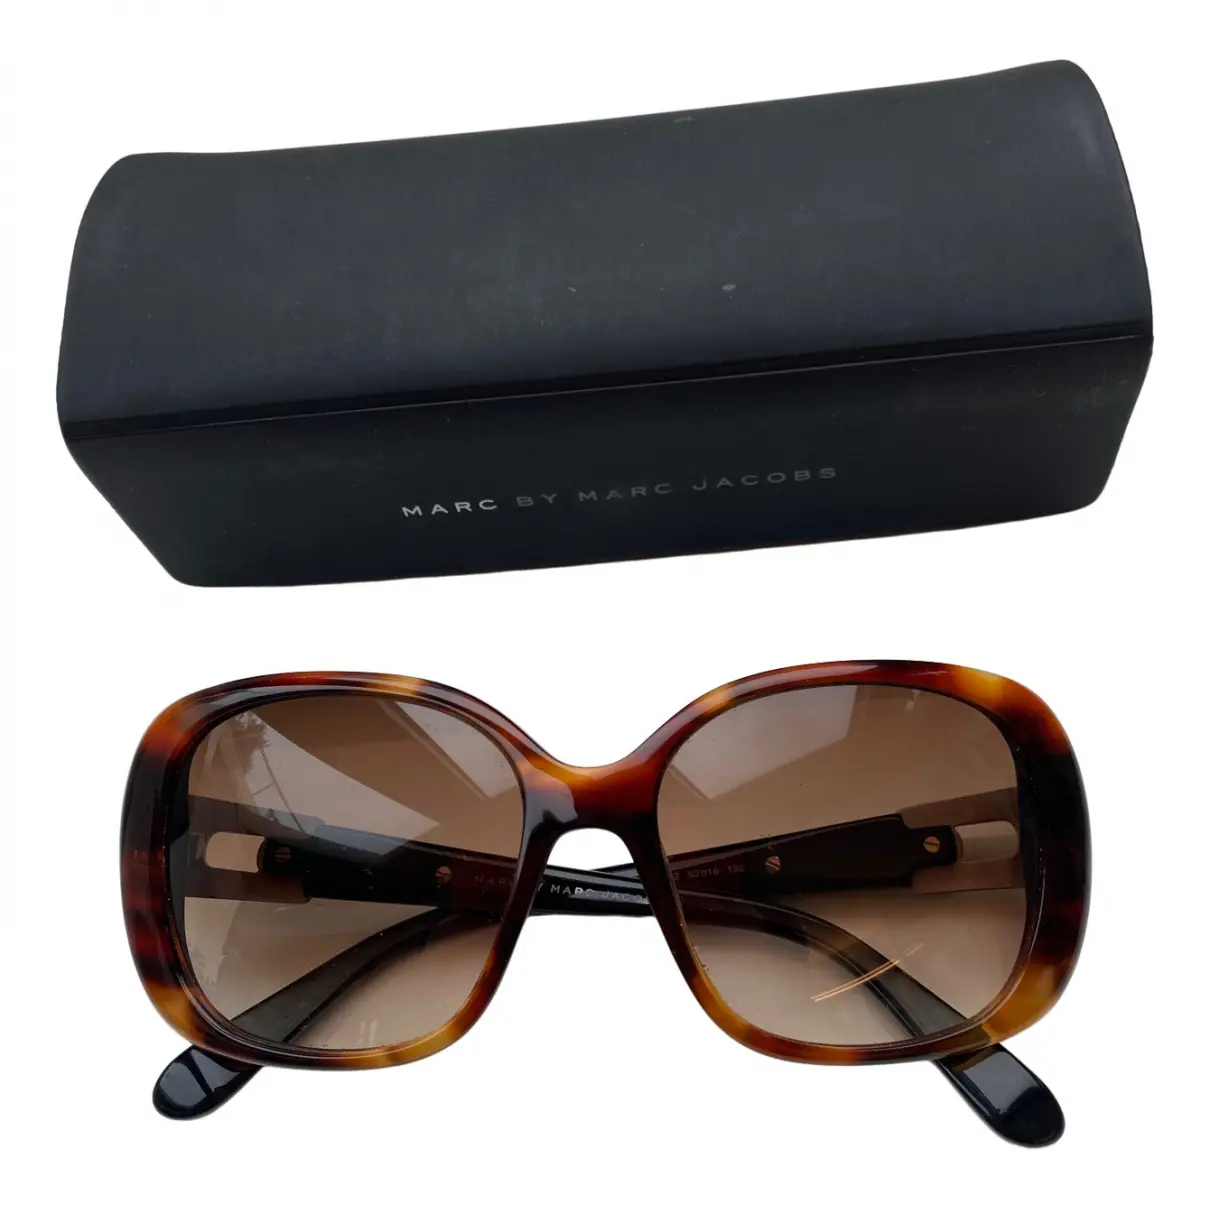 Goggle glasses Marc by Marc Jacobs